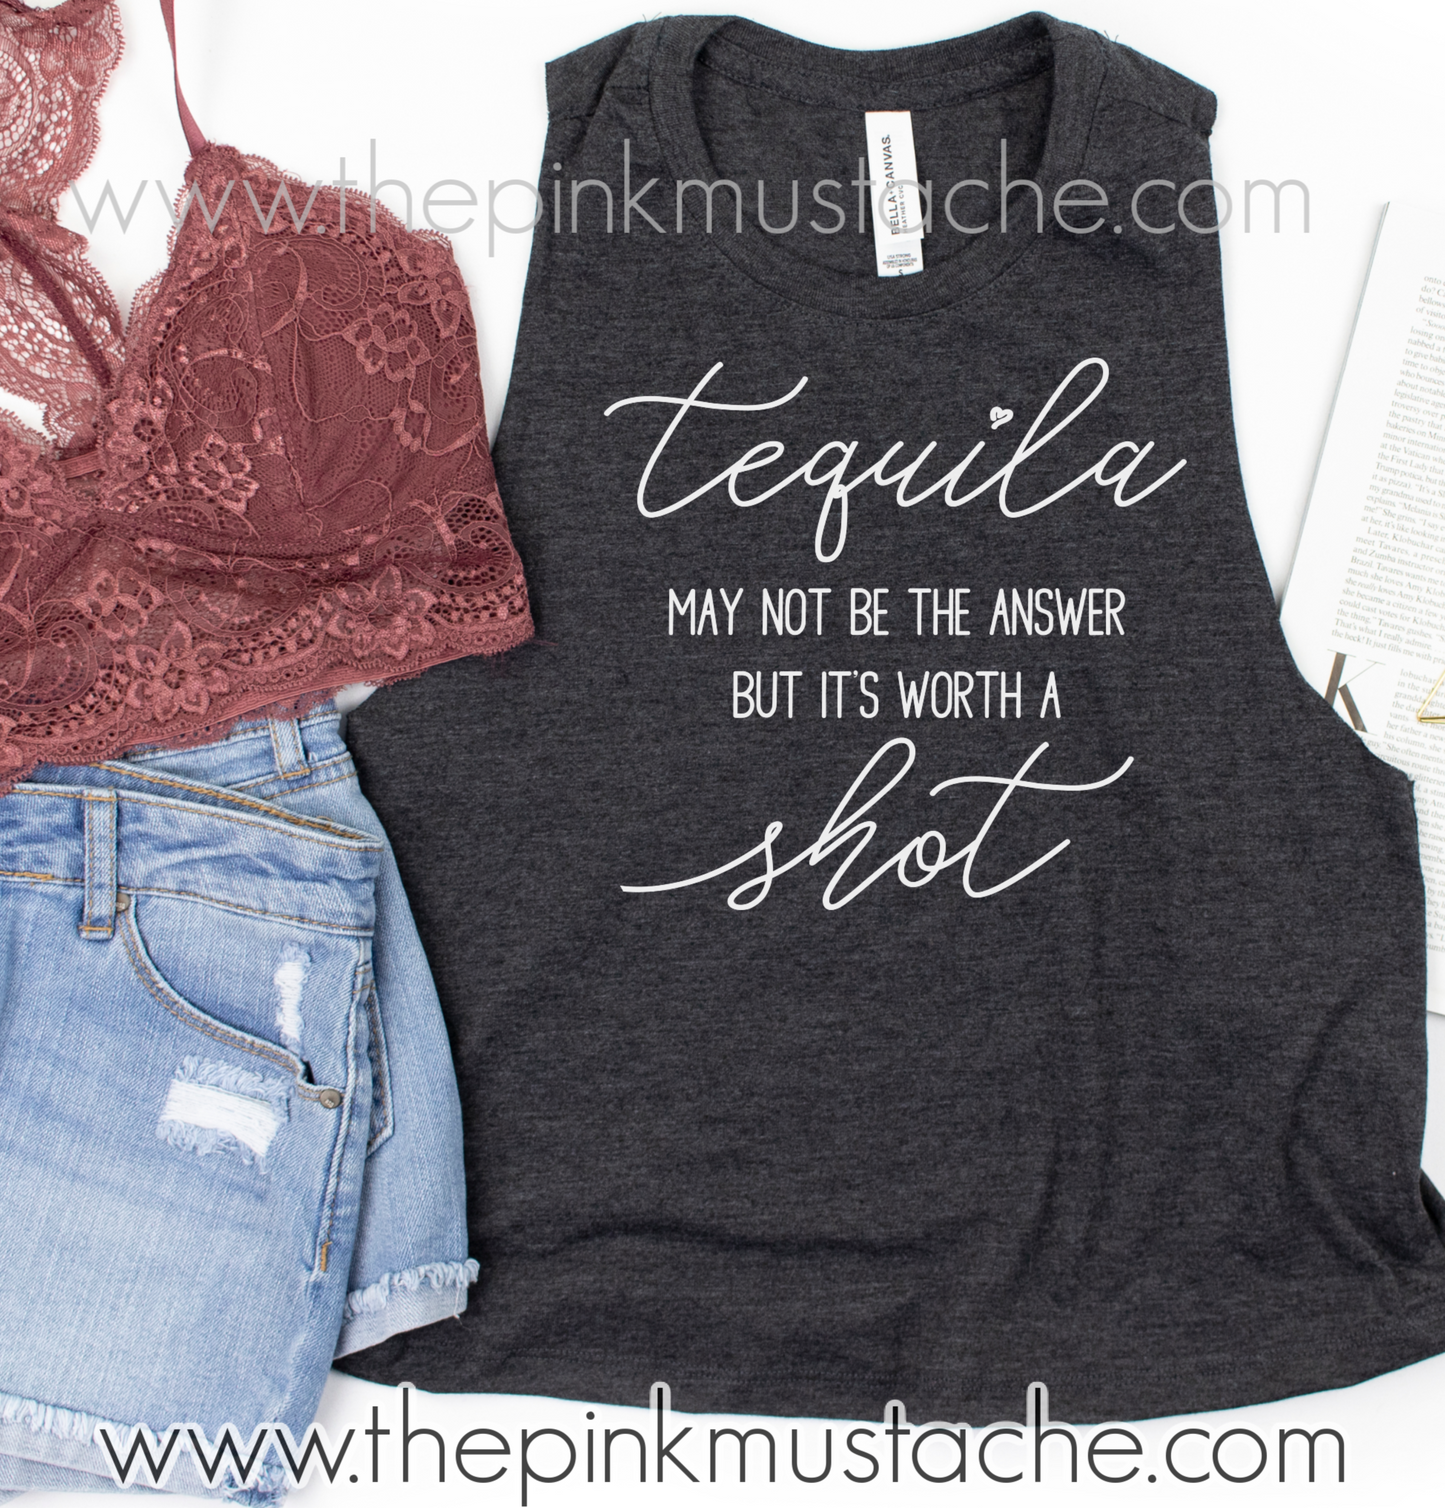 FLASH SALE - Tequila Might Not Be The Answer But It's Worth A Shot  Bella Muscle Tank, Cropped Tank, or Tee/ Quarantine Life / Funny Shirts